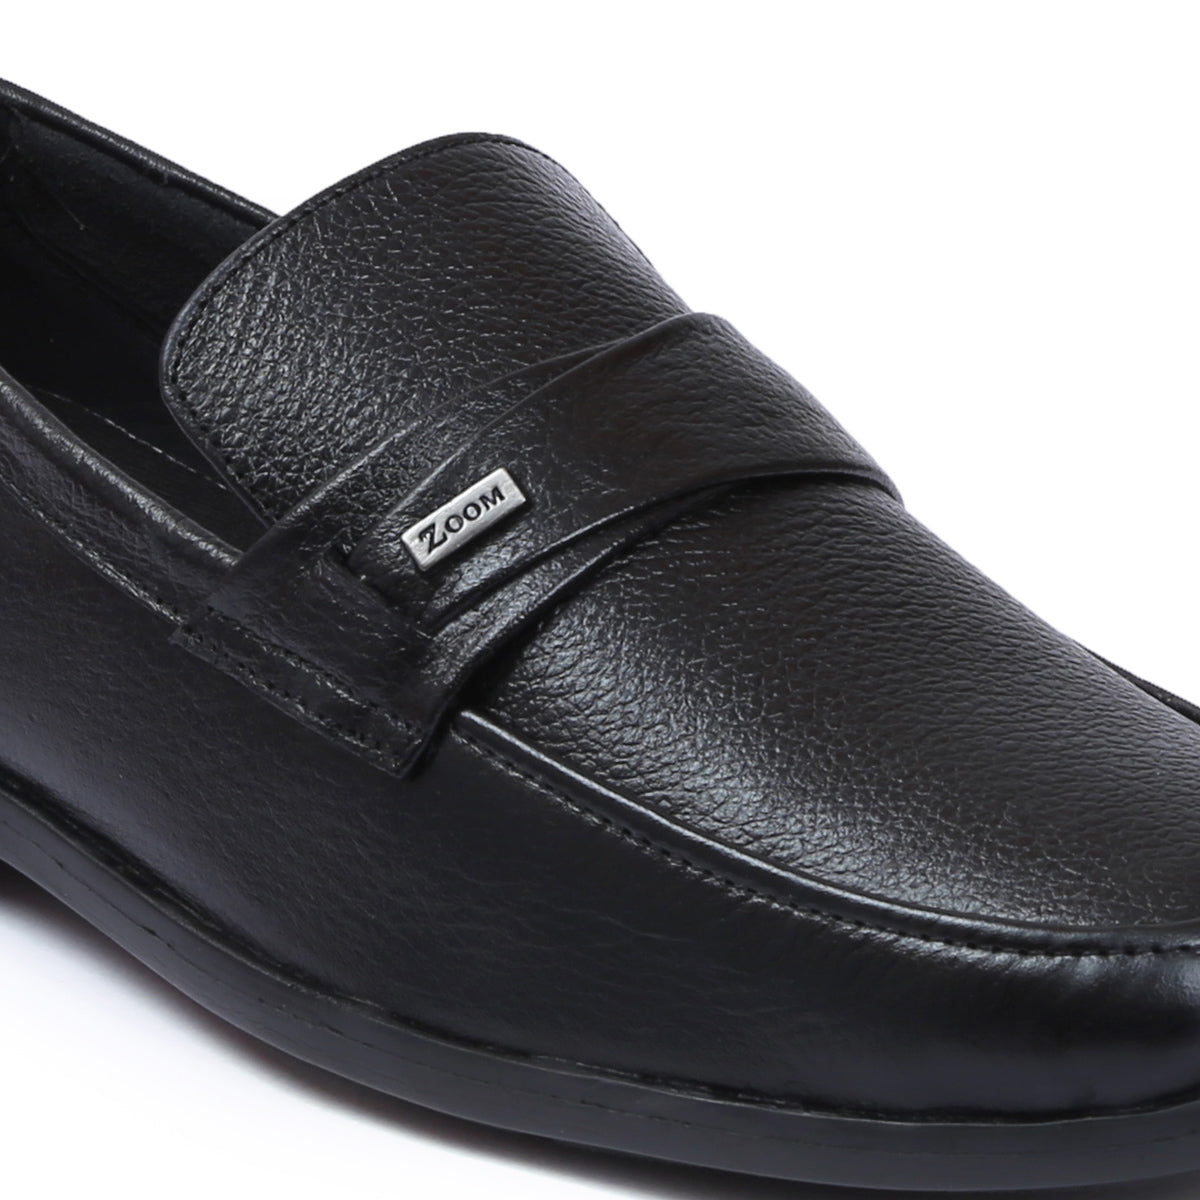 Zoom Shoes™ Leather Loafers for Men SL-13